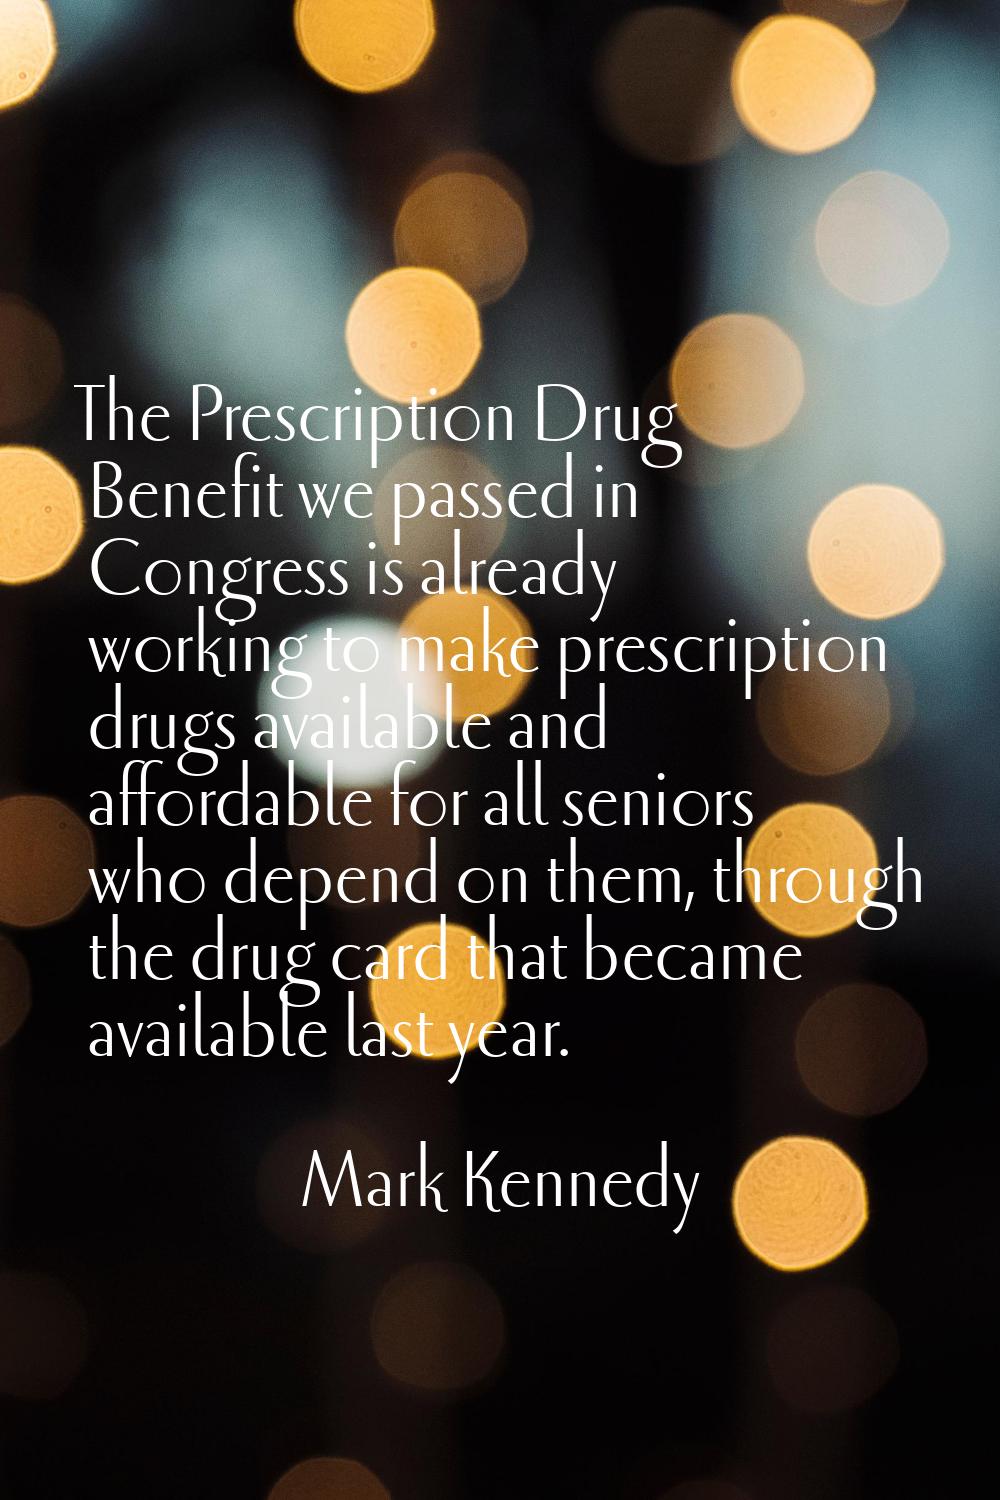 The Prescription Drug Benefit we passed in Congress is already working to make prescription drugs a